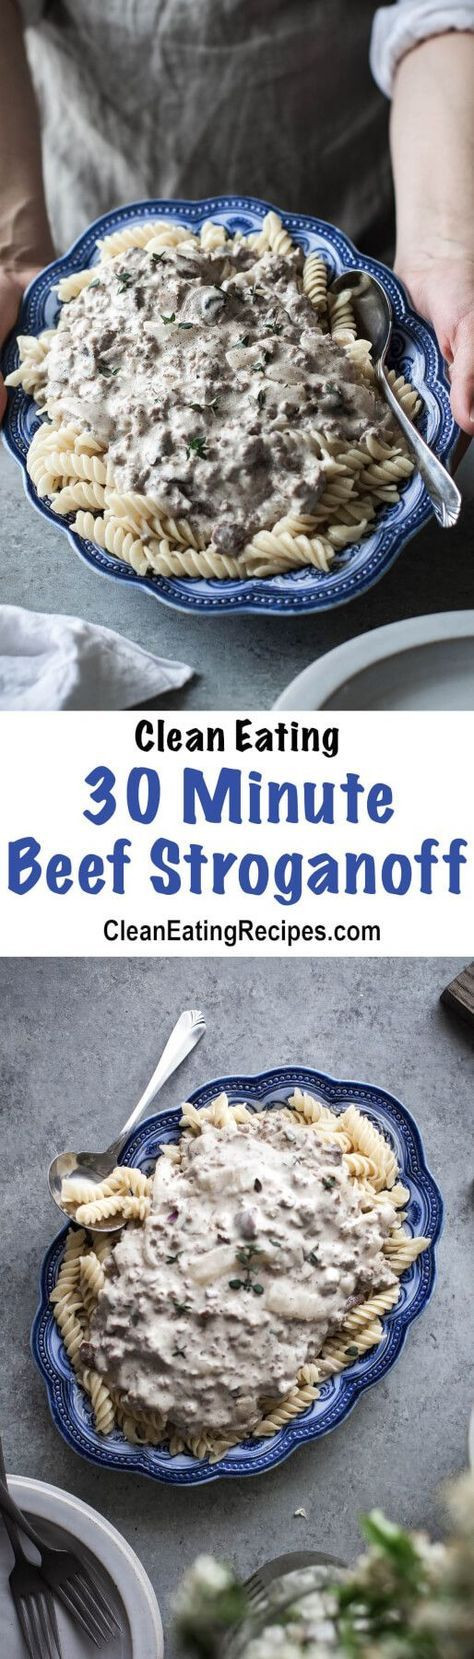 Ground Beef Stroganoff Without Mushrooms
 e Pot Ground Beef Stroganoff Recipe Without Cream of